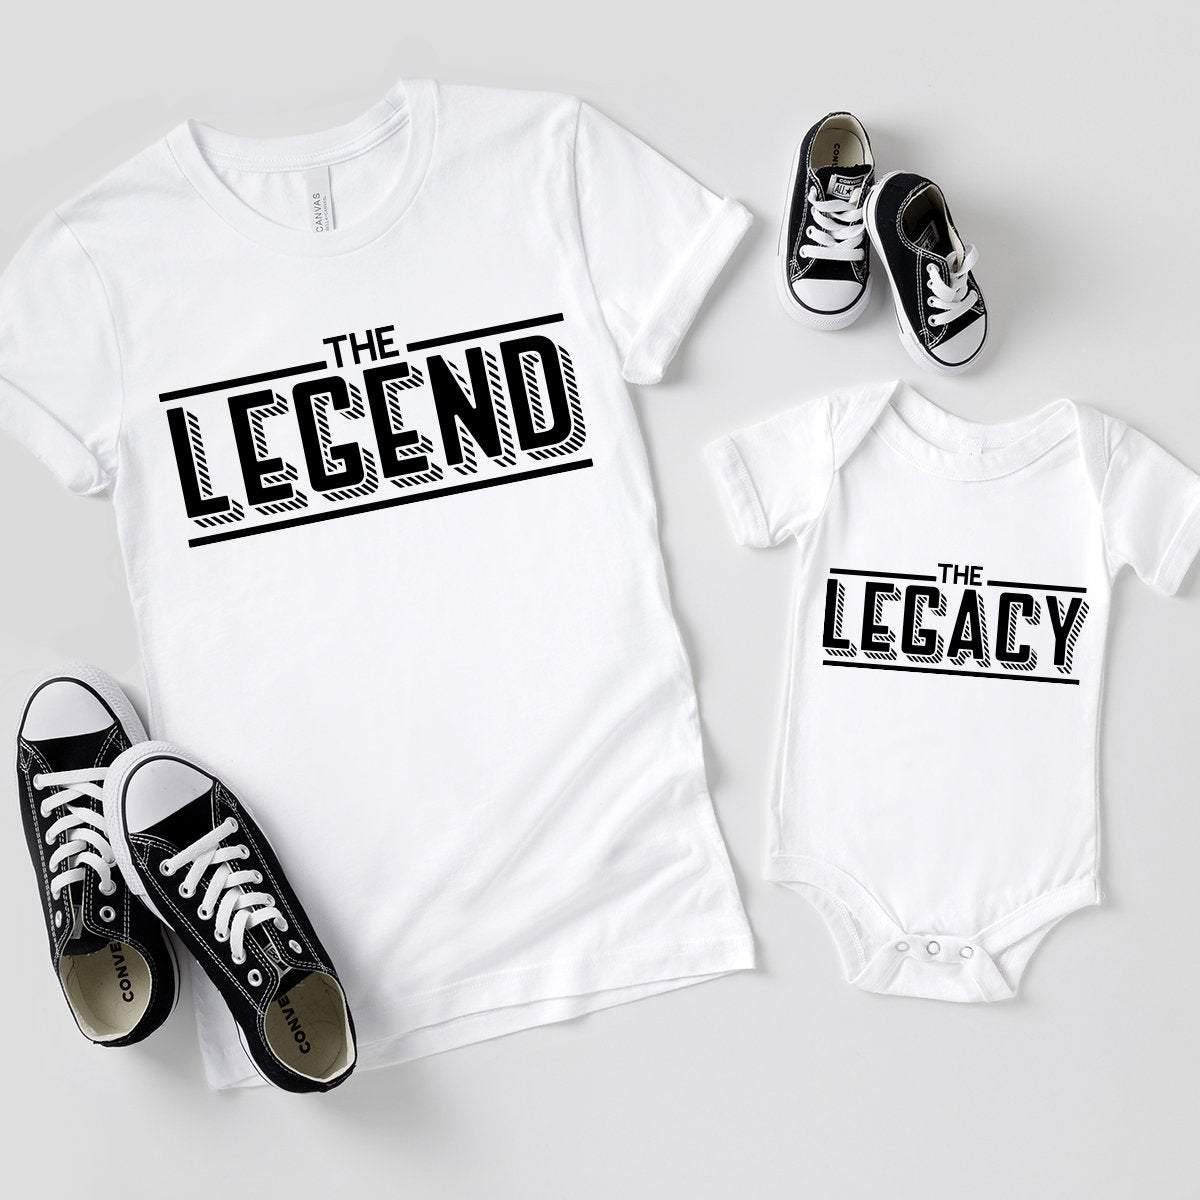 Dad And Son Matching Shirt, Daddy And Son Shirt, Legend Legacy Shirt, Funny Family Shirt, Fathers Day Matching Shirt, Dad And Son T-Shirt - Fastdeliverytees.com